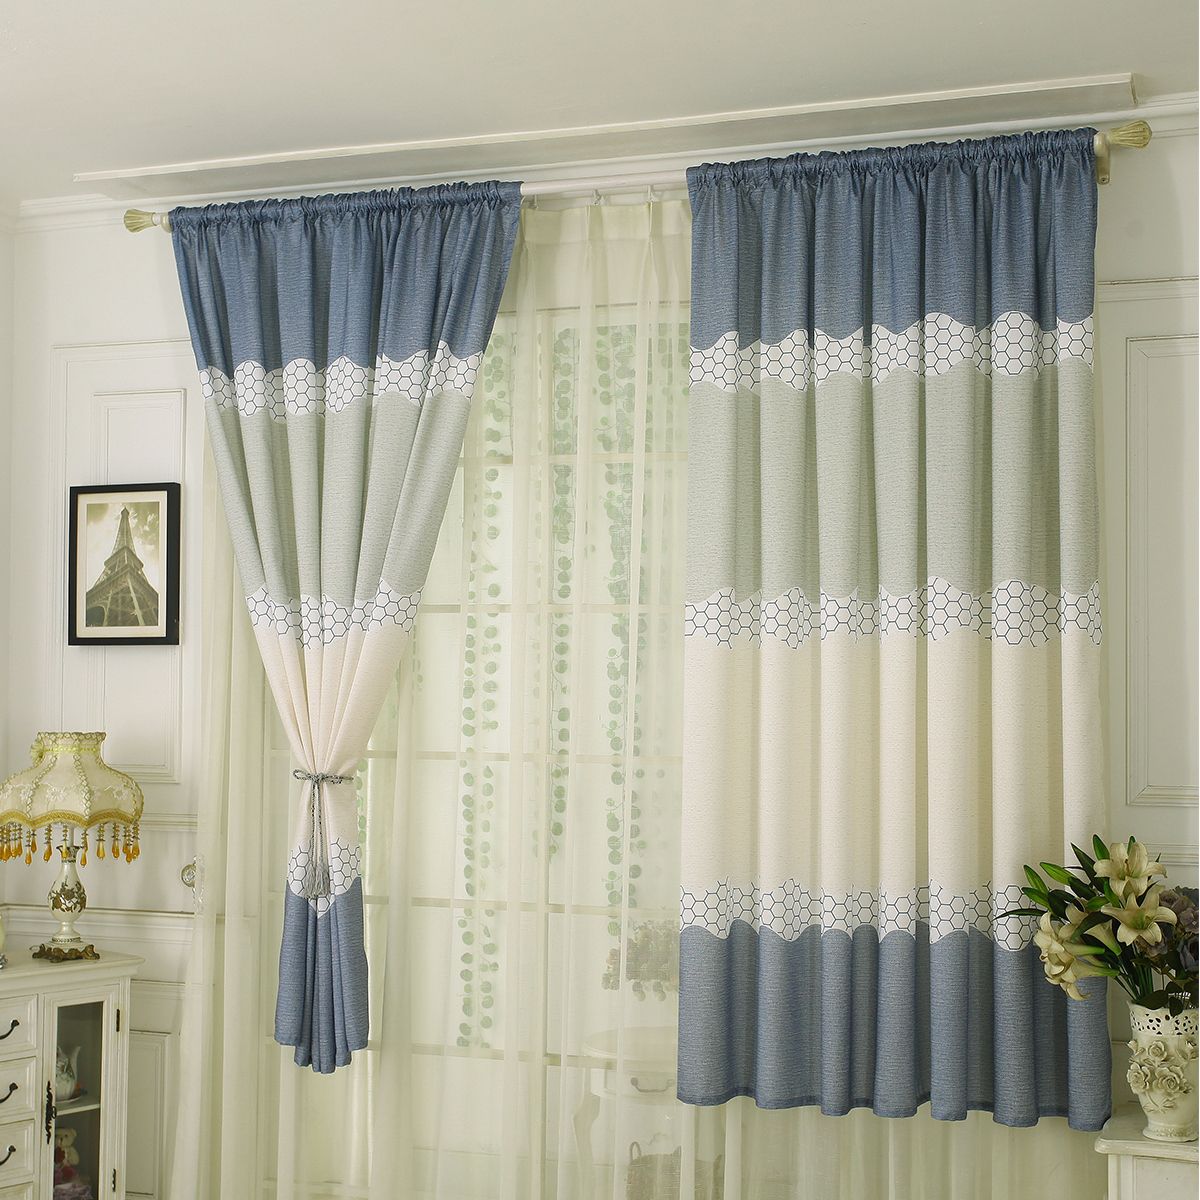 Details About Thermal Pencil Pleat Blackout Window Curtain Panel Rod Pocket  Net Slot Top Tape With Willow Rod Pocket Window Curtain Panels (Photo 26 of 30)